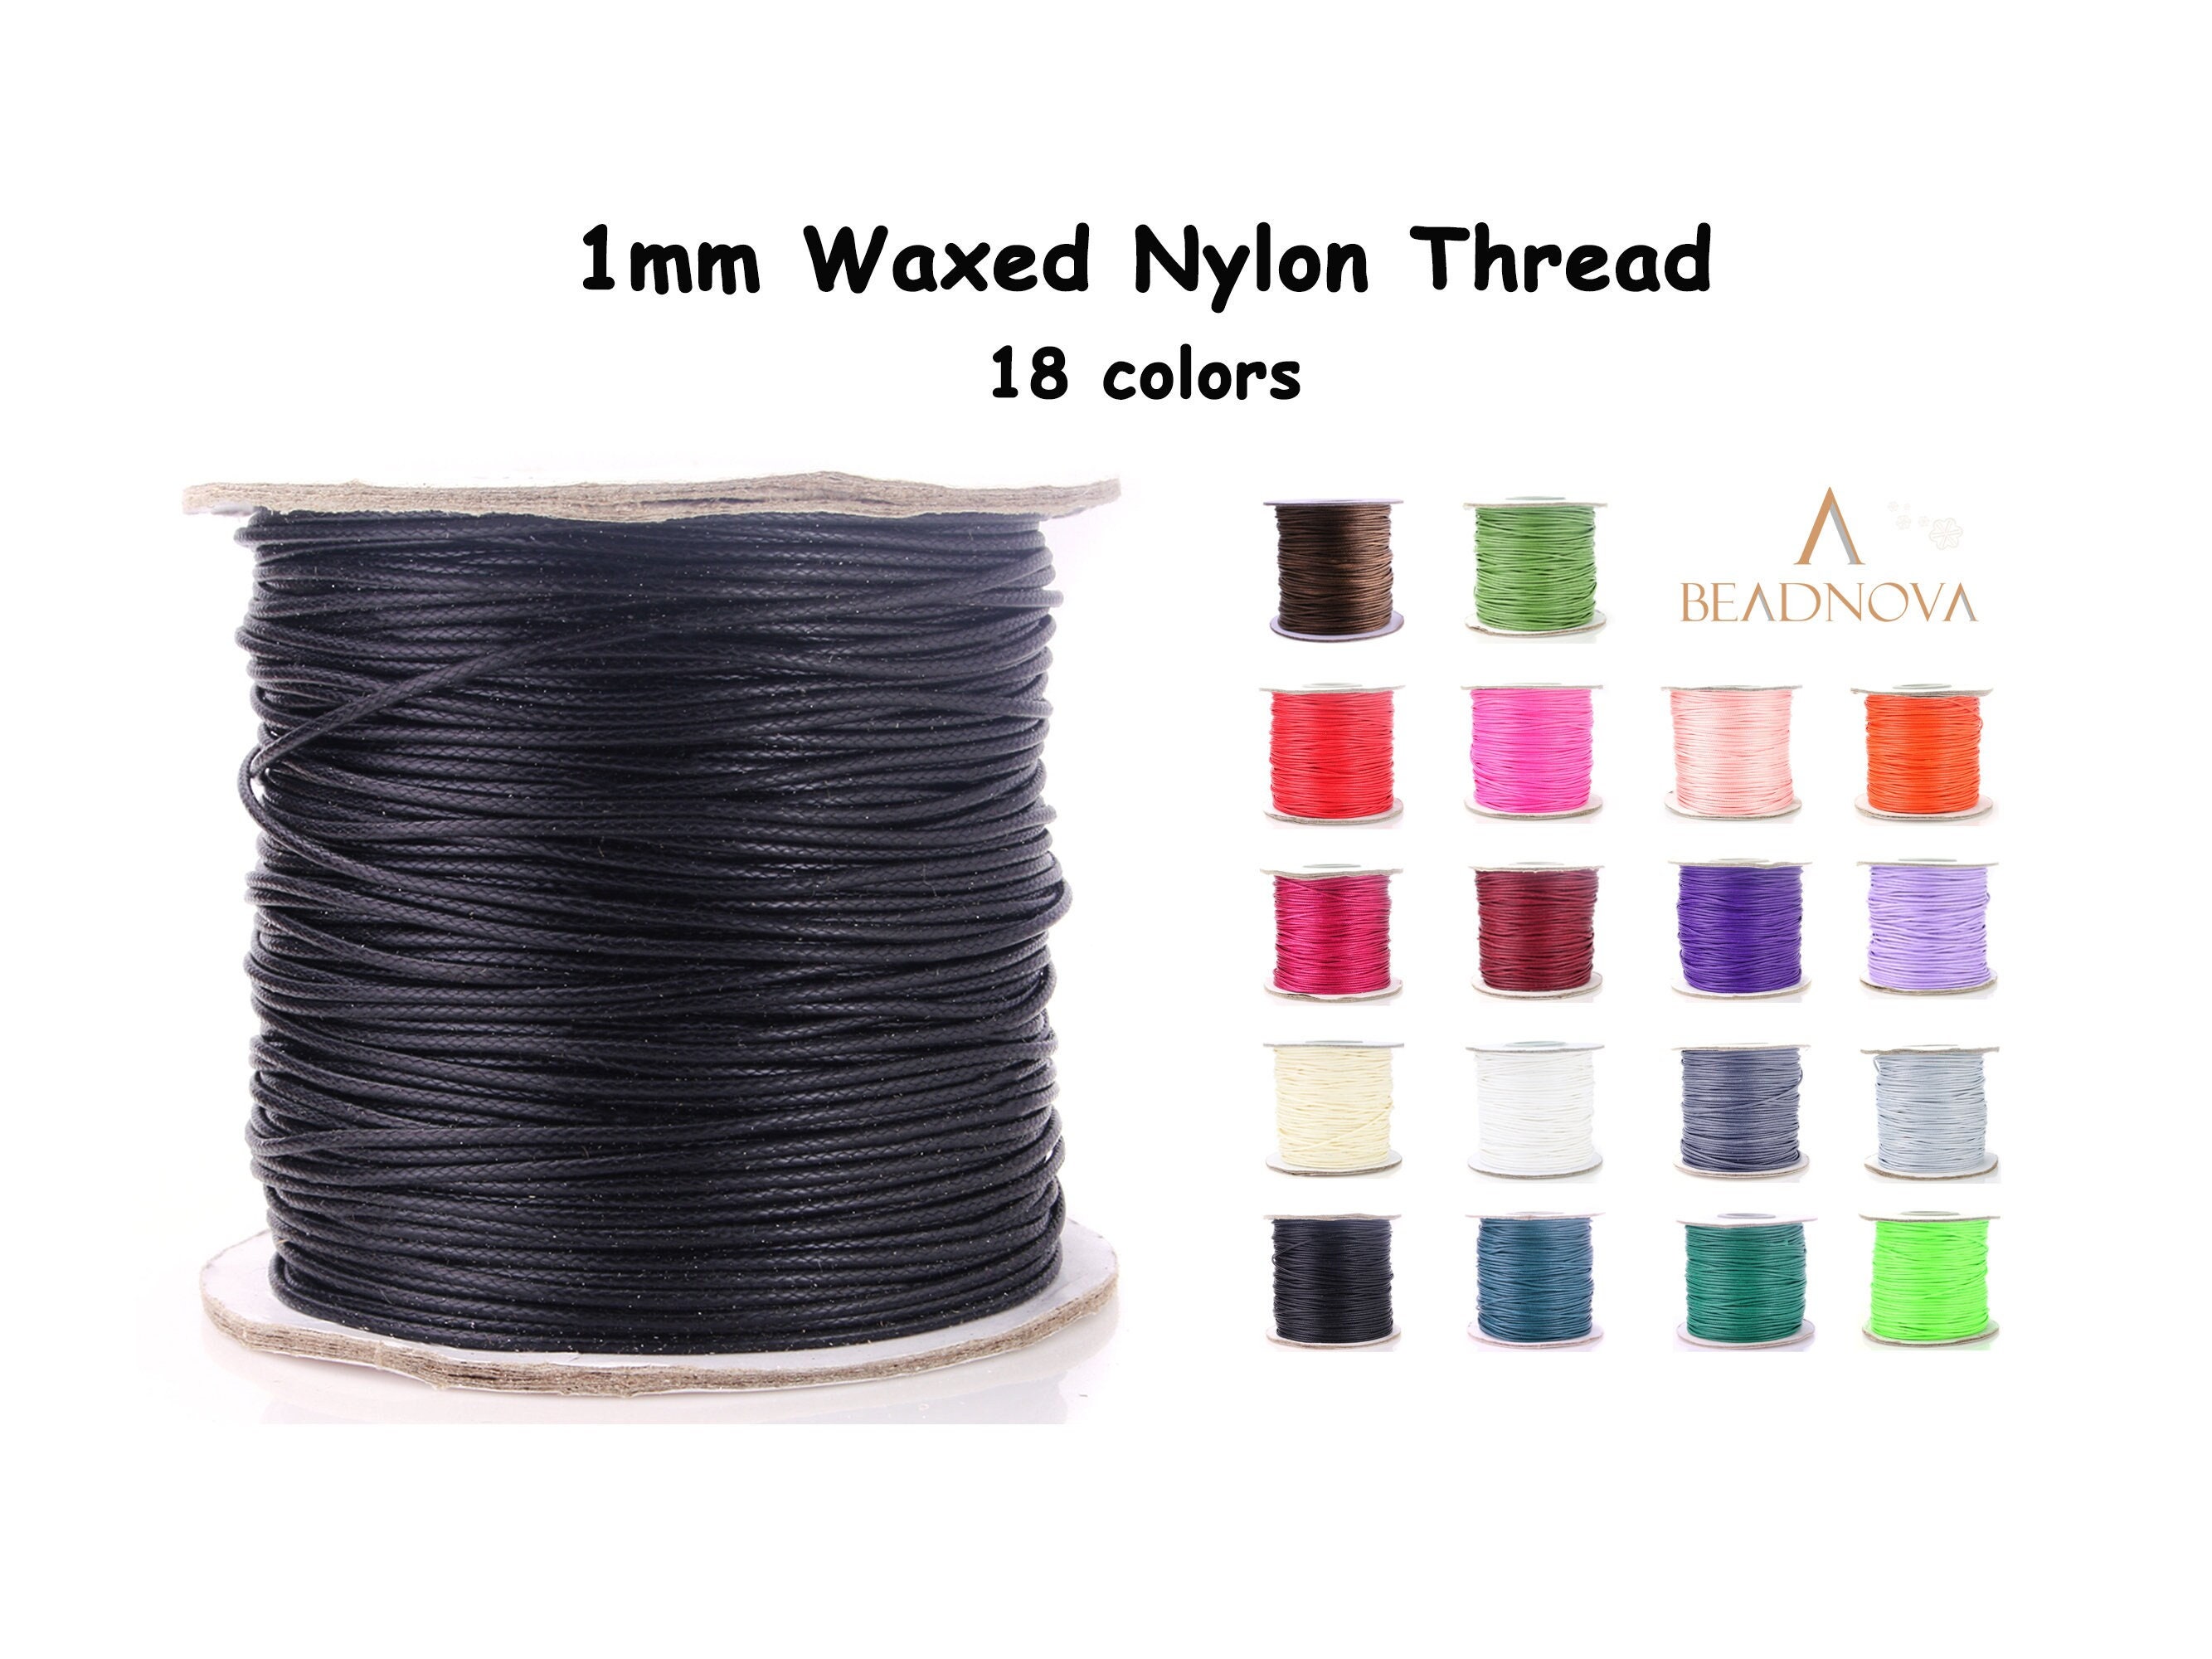 Waxed Poly Thread 2 Oz Spool, Ideal for Pine Needle Baskets, Gourd